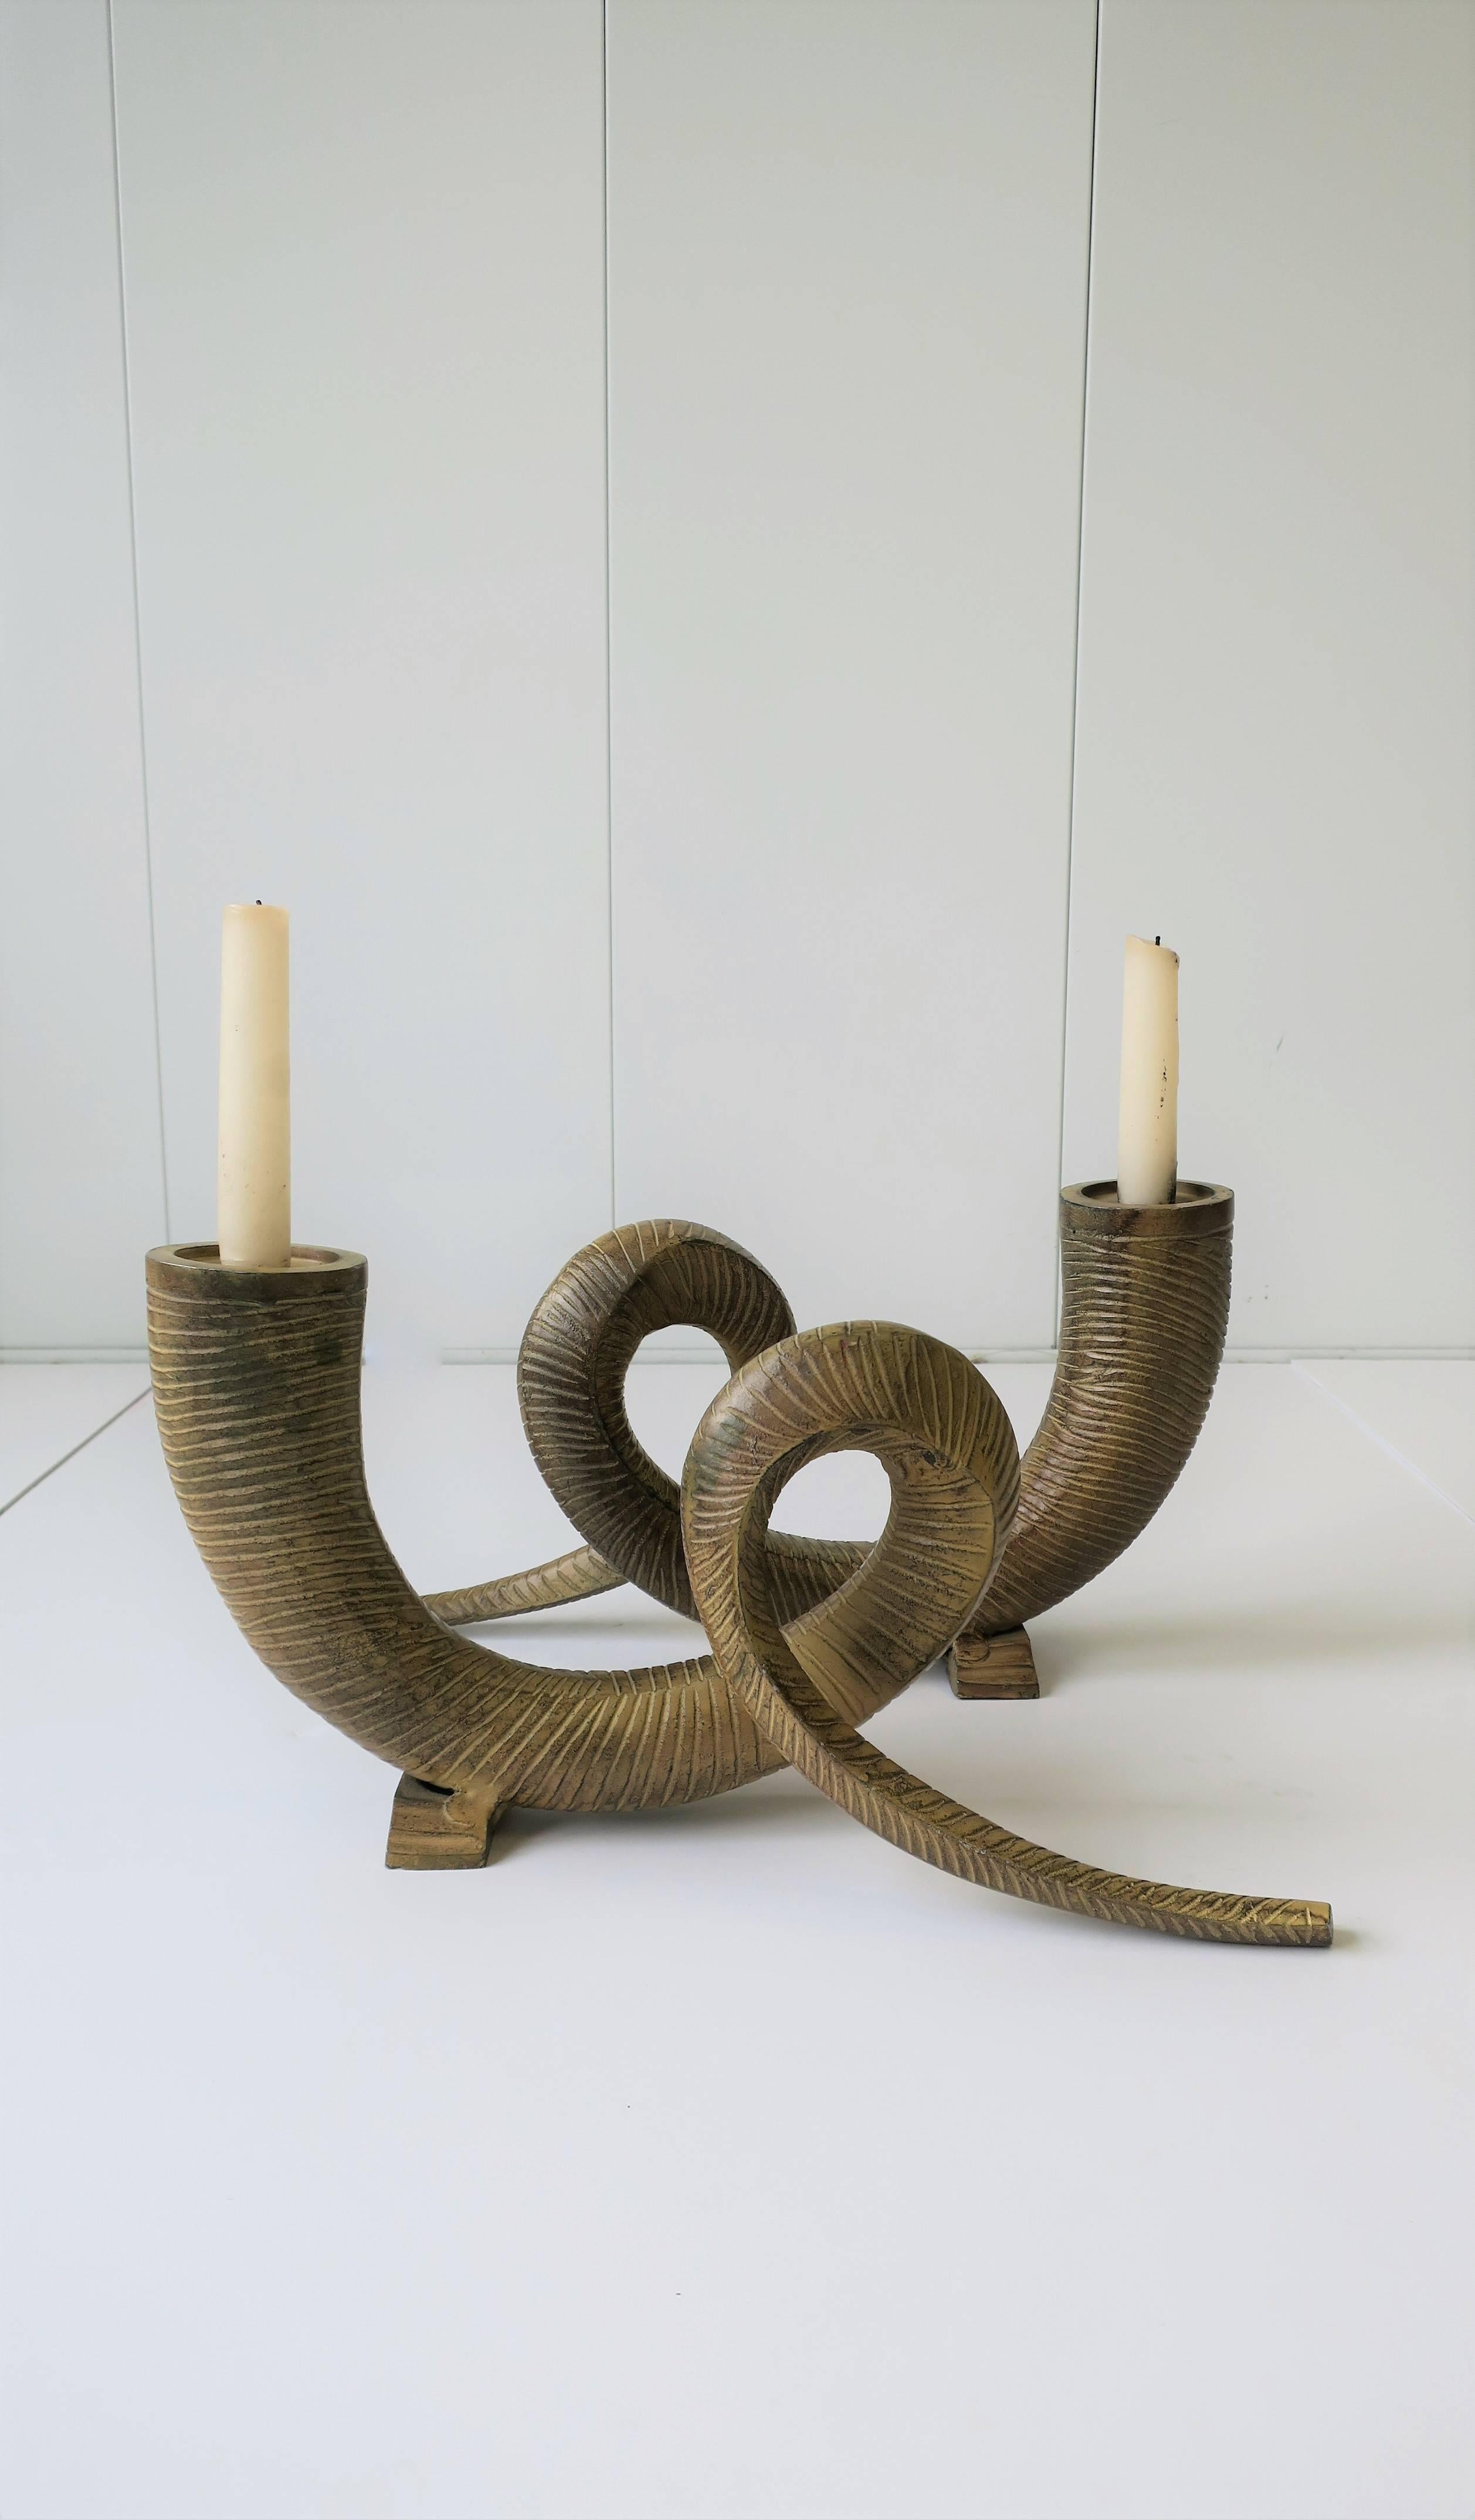 A pair of '80s Postmodern metal animal rams horn decorative sculptures or candlestick holders, circa 1980s. This pair of enameled metal ram horn candlesticks holders can also work great as standalone decorative objects as show in images. 

Each